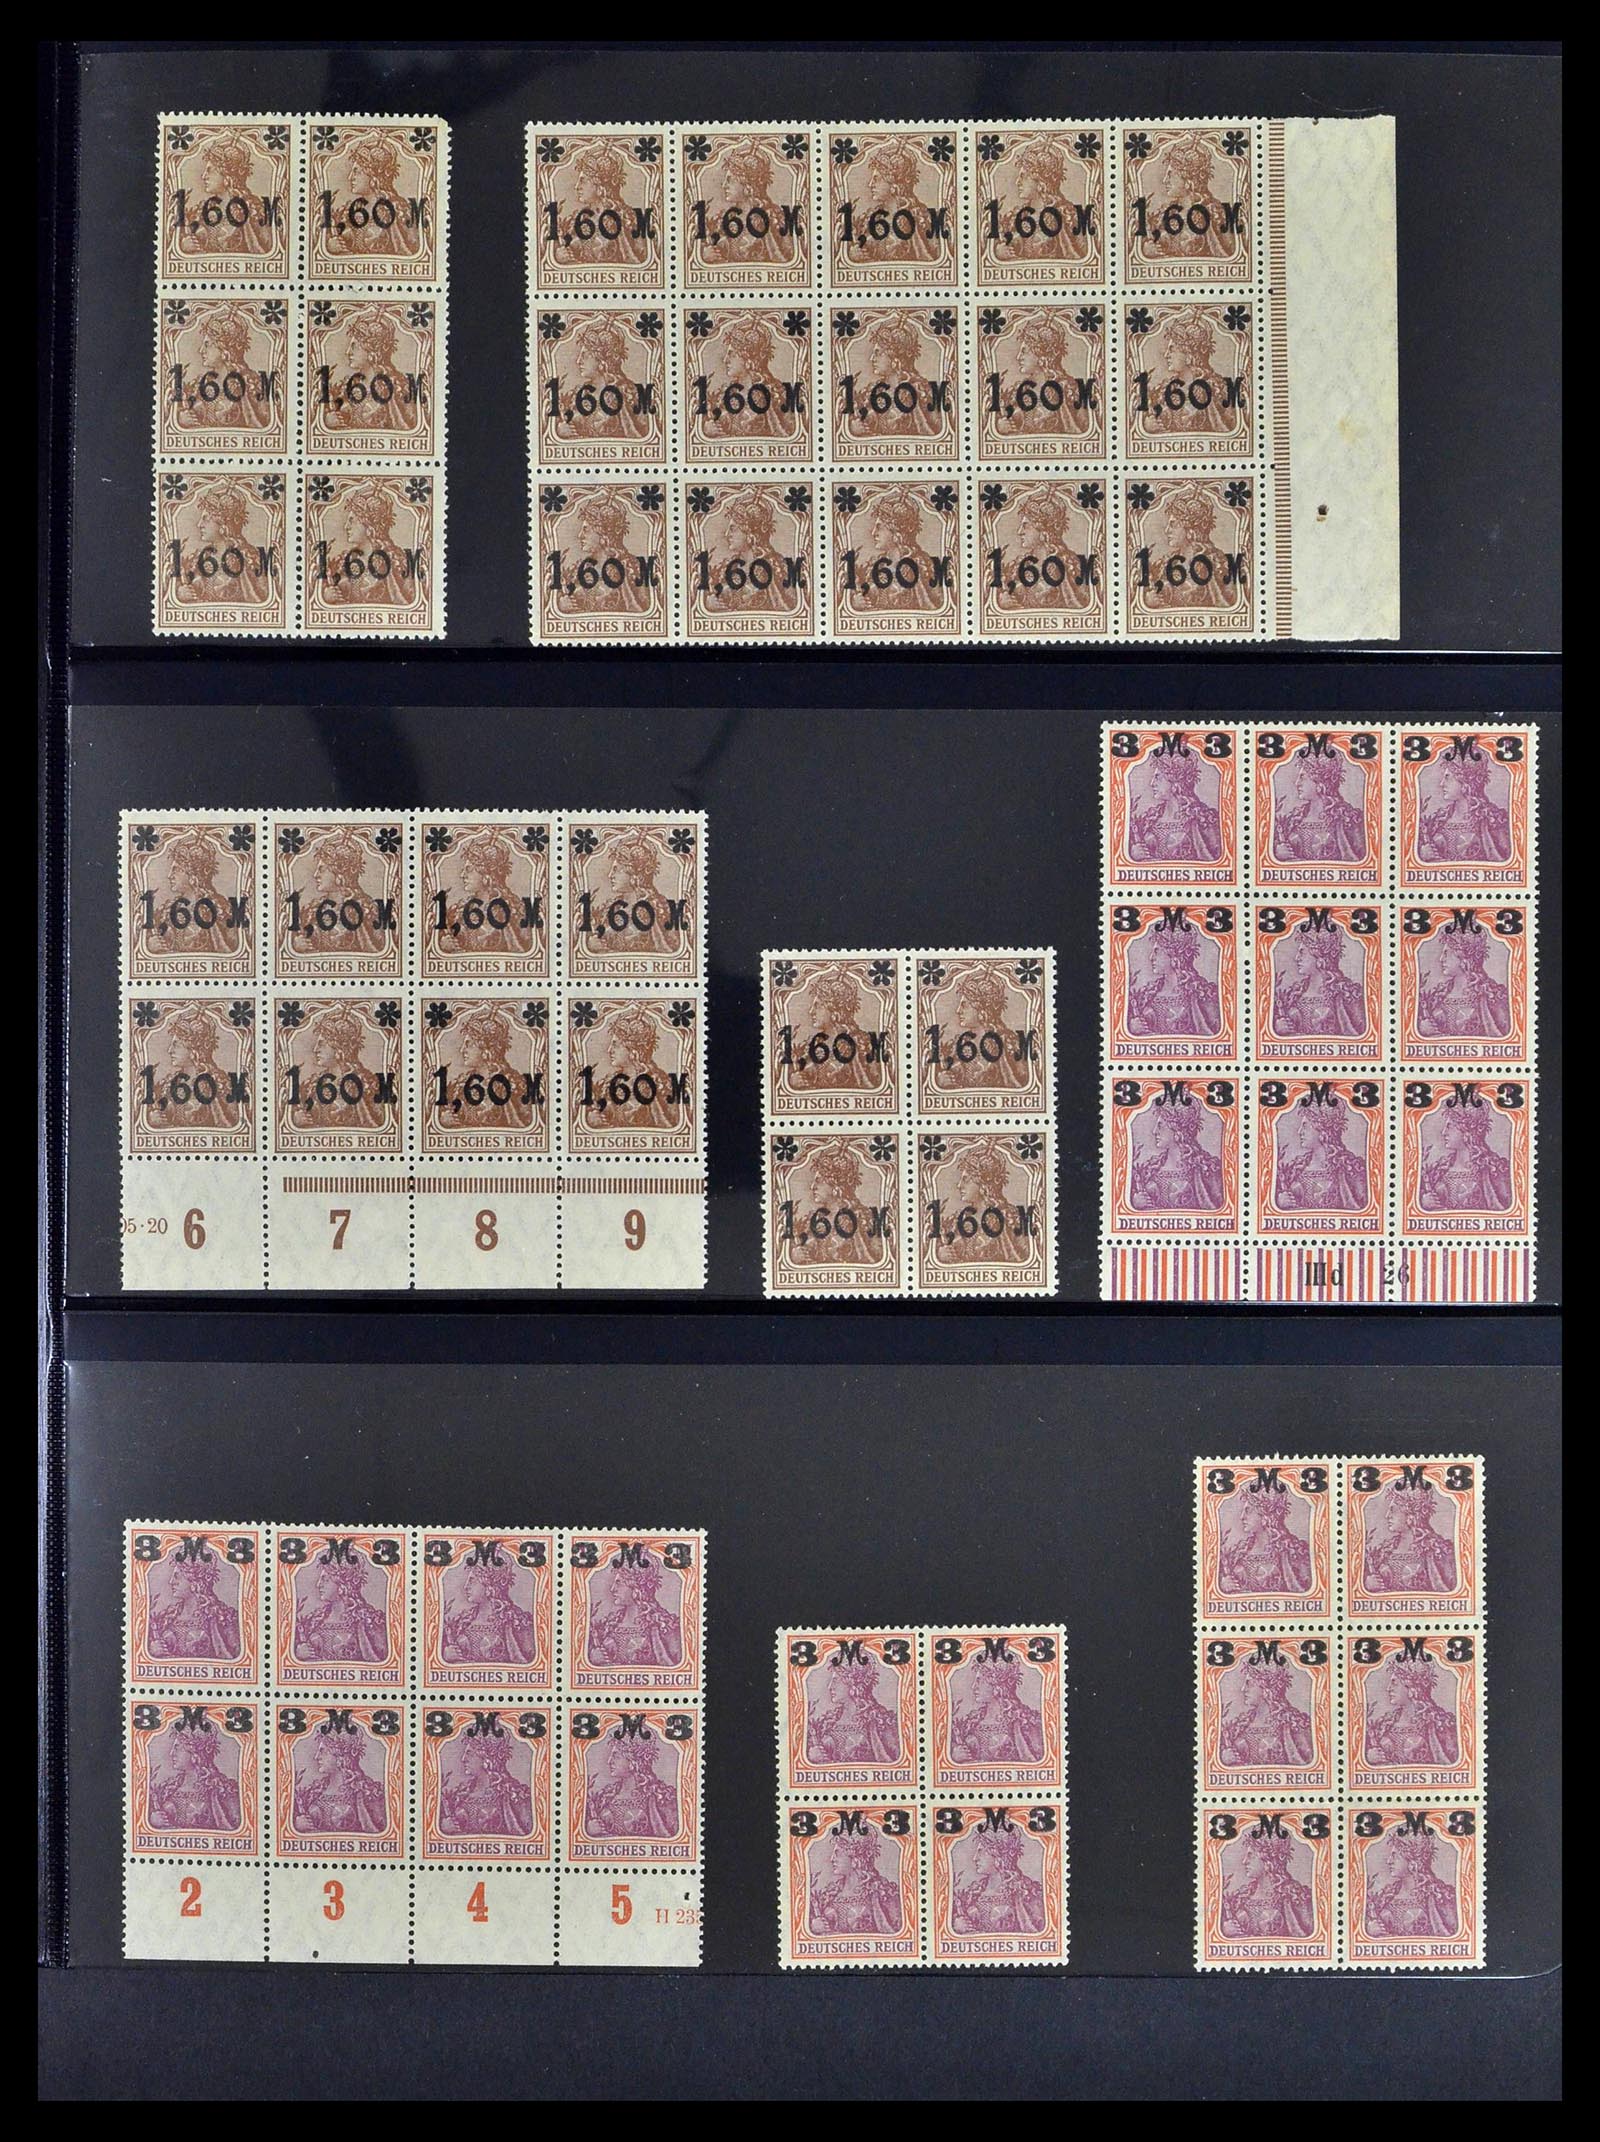 39255 0009 - Stamp collection 39255 German Reich MNH blocks of 4.